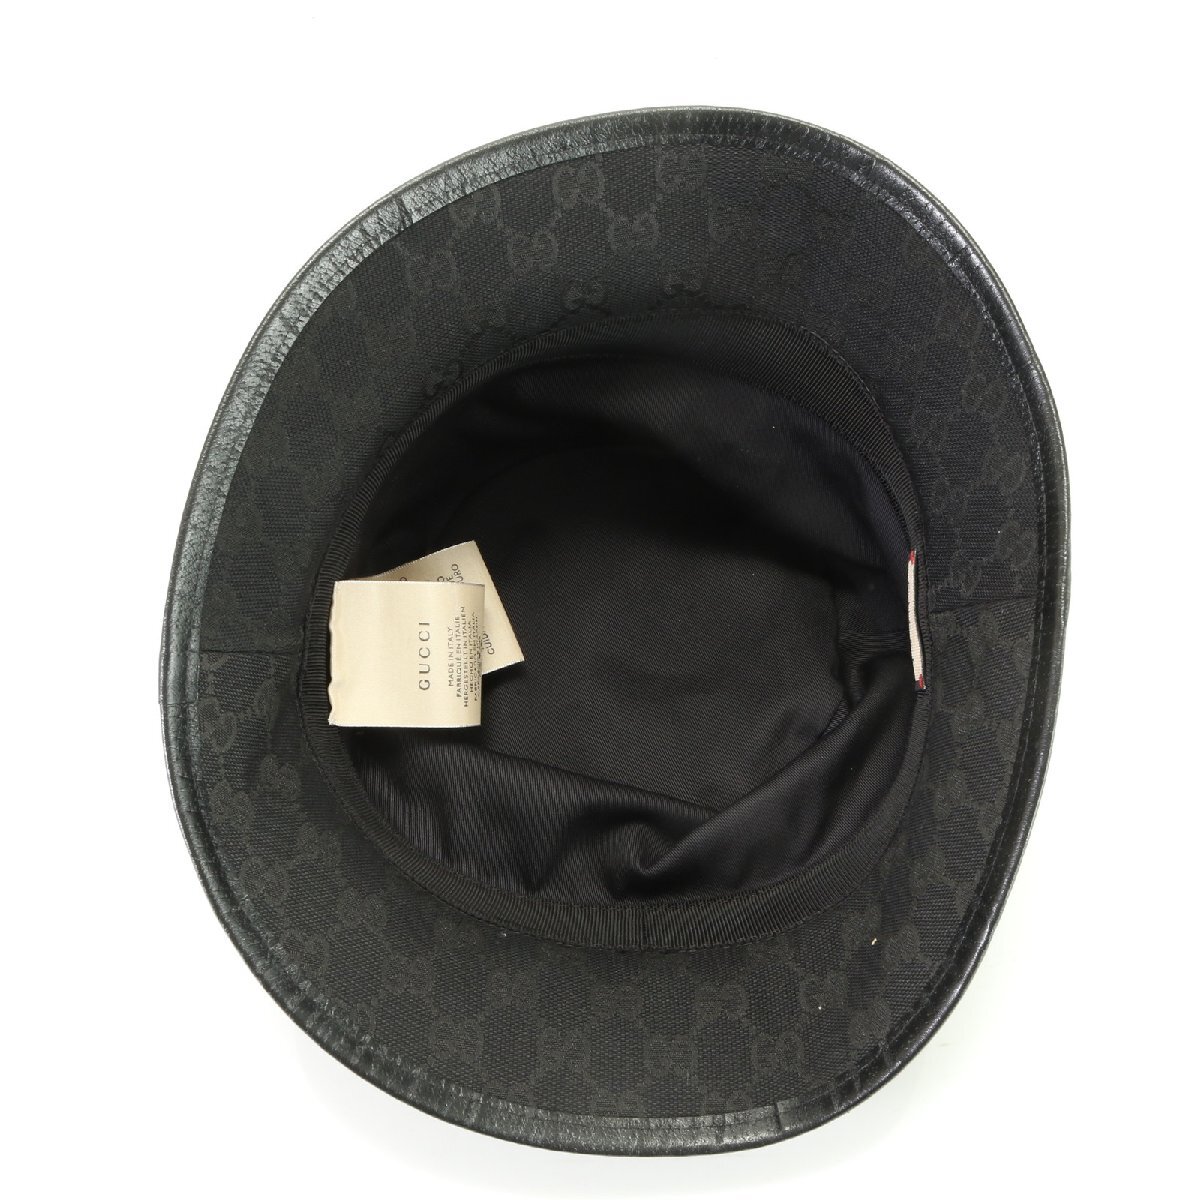 1 jpy # as good as new # present goods # Gucci # double G GG canvas bucket hat 576587 leather hat black men's lady's TJE 2.16-12